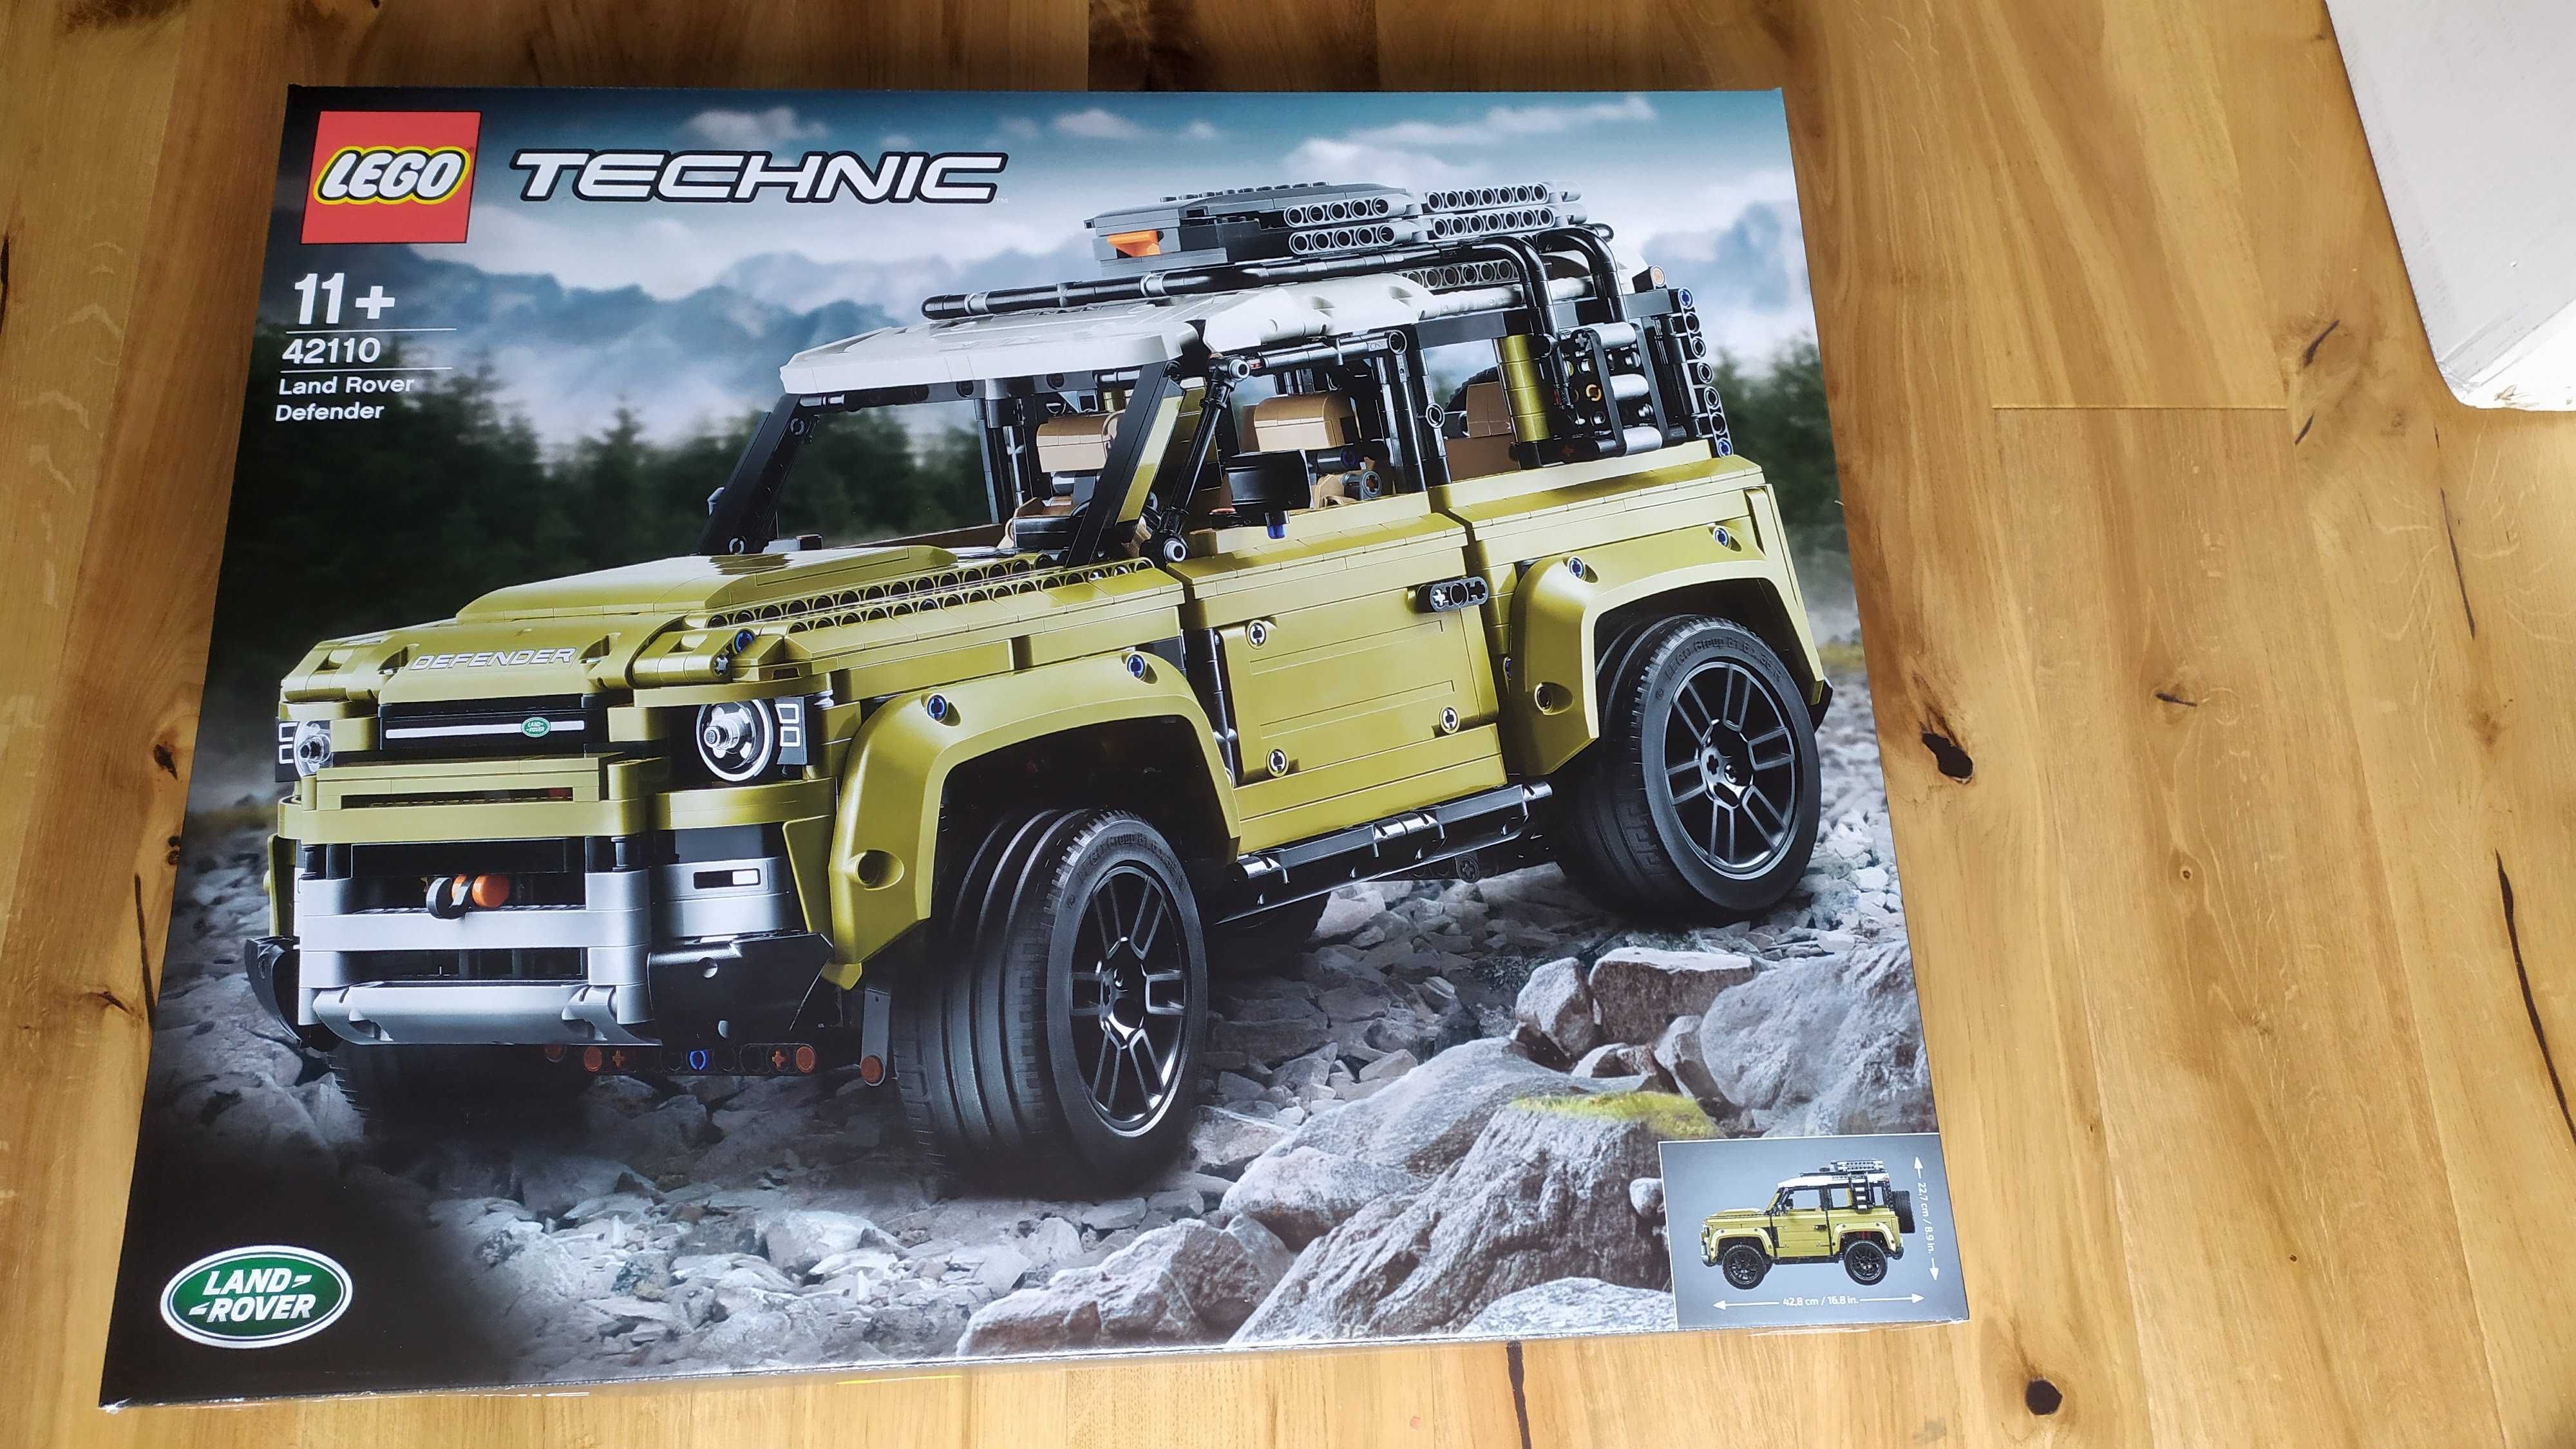 LEGO Technic Land Rover Defender 42110 - Nowy, plomby producenta